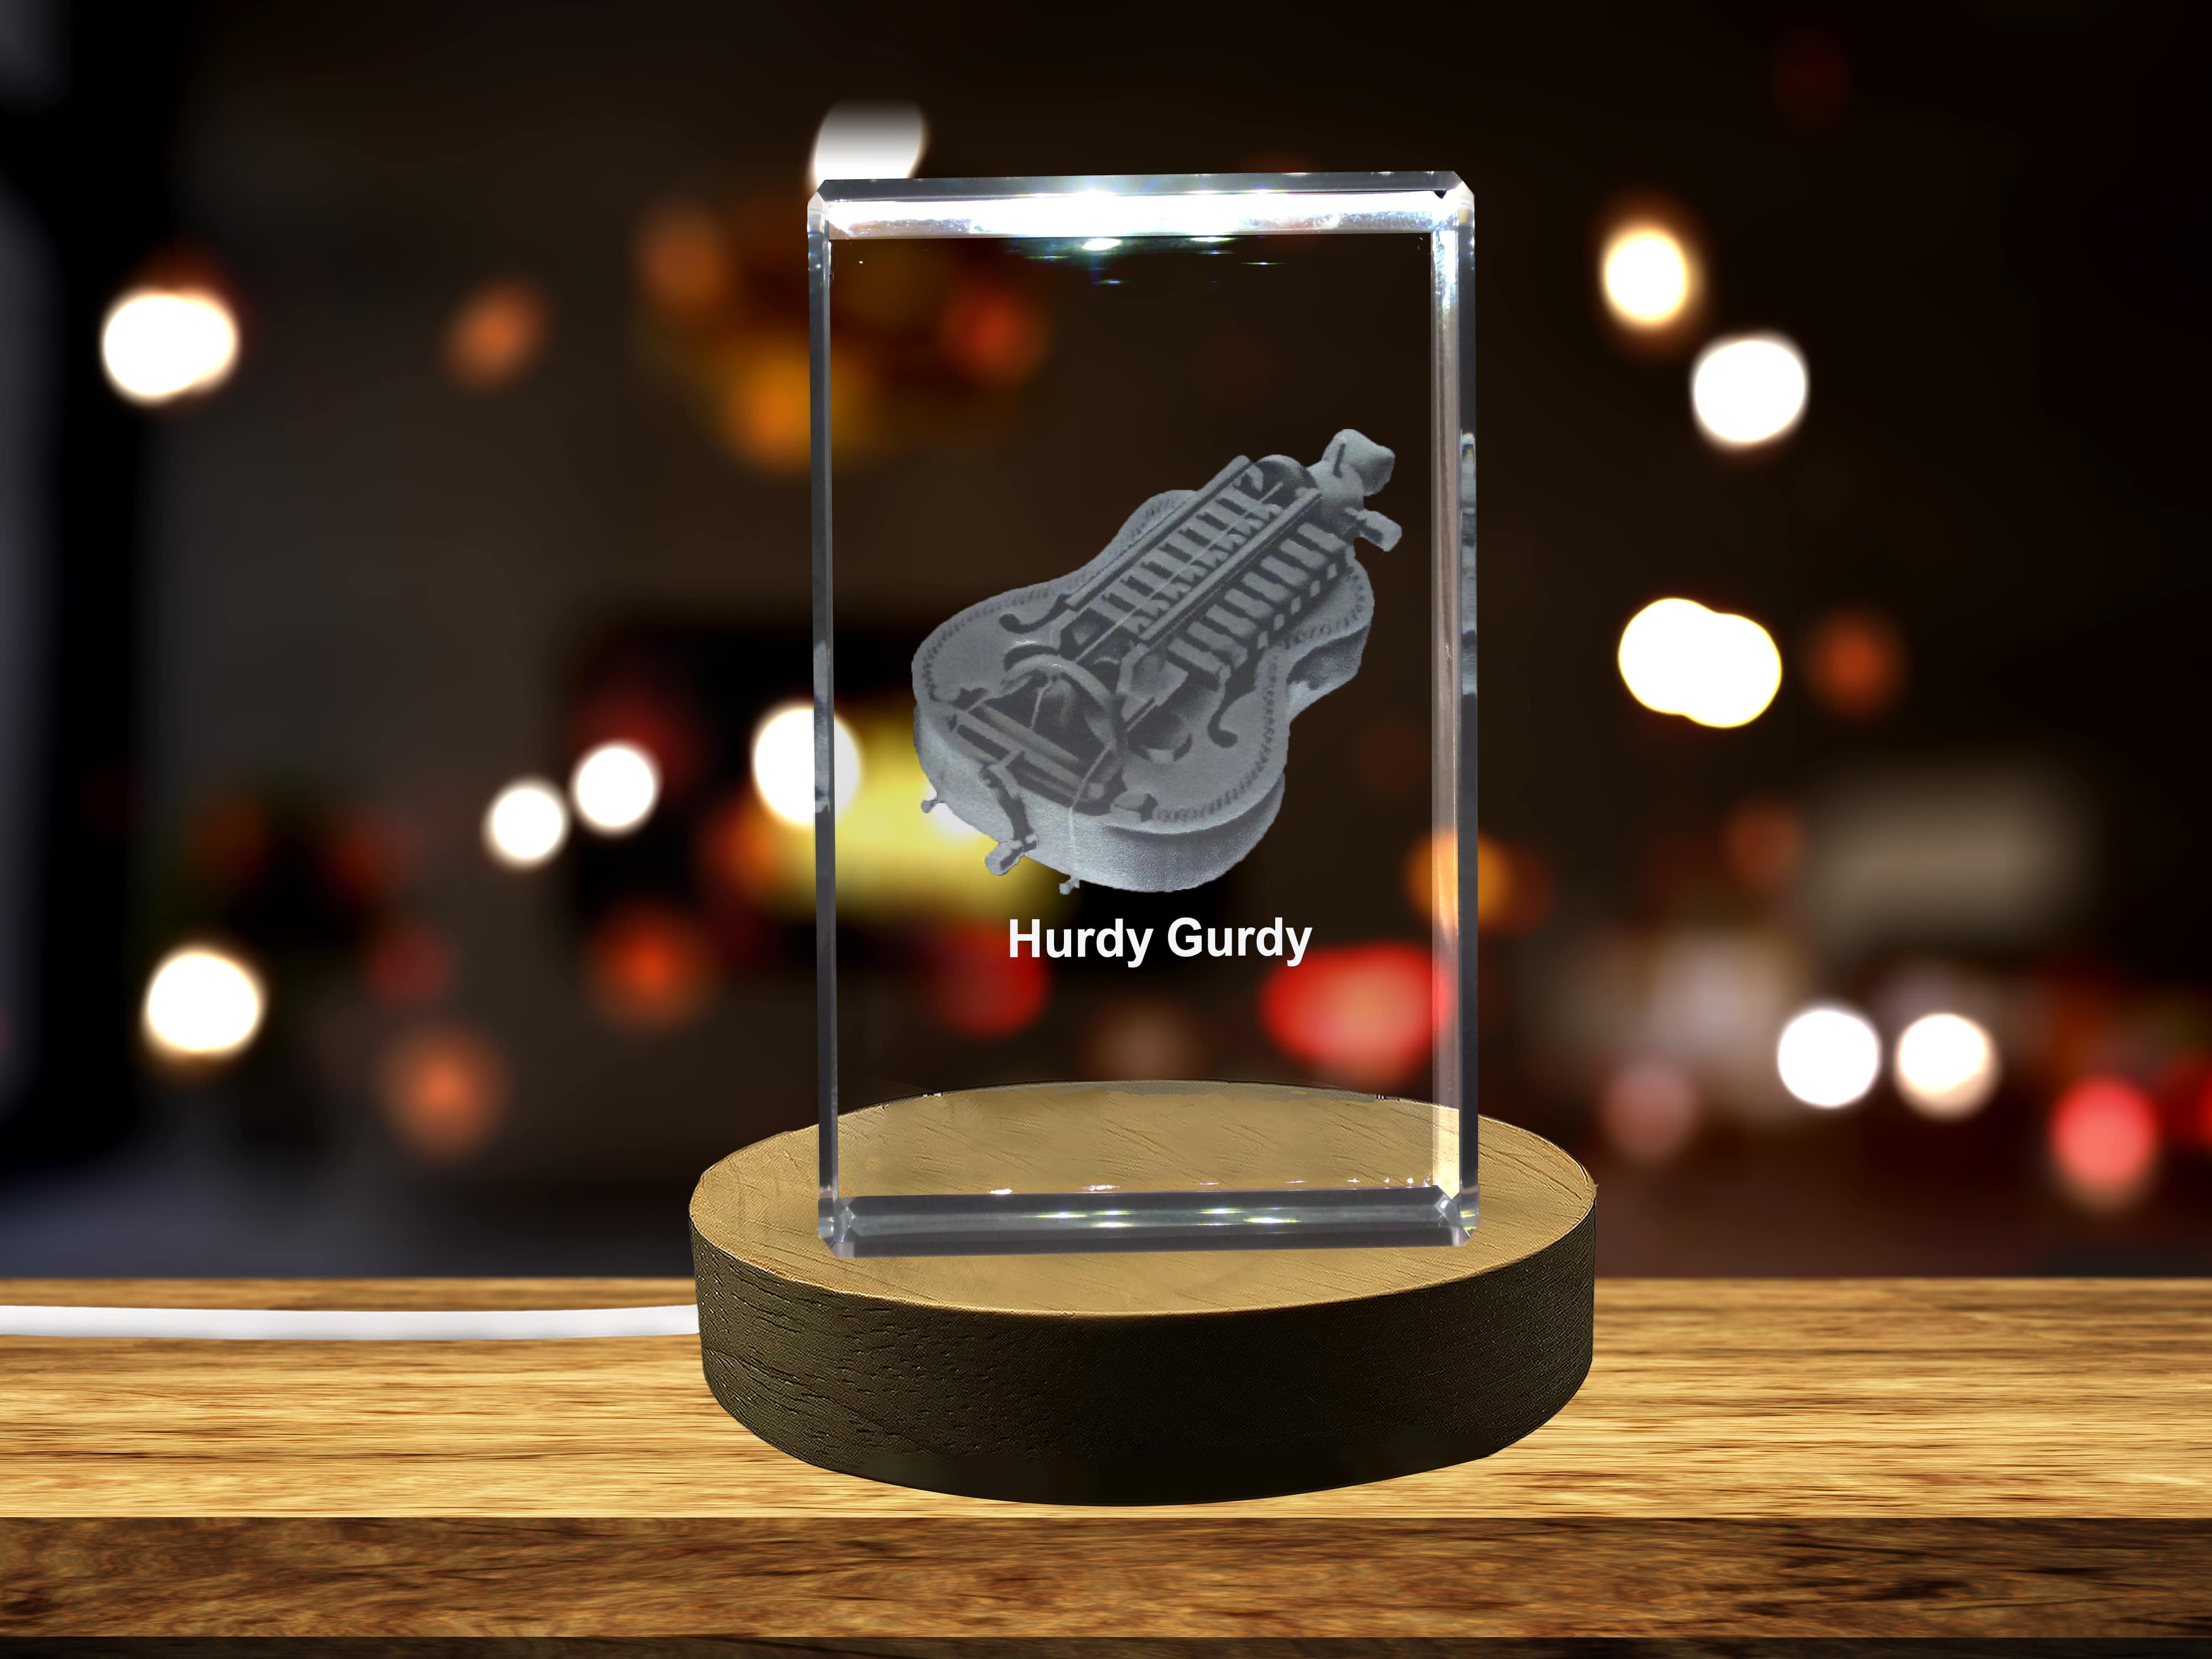 Hurdy Gurdy 3D Engraved Crystal | Music 3D Engraved Crystal Keepsake A&B Crystal Collection